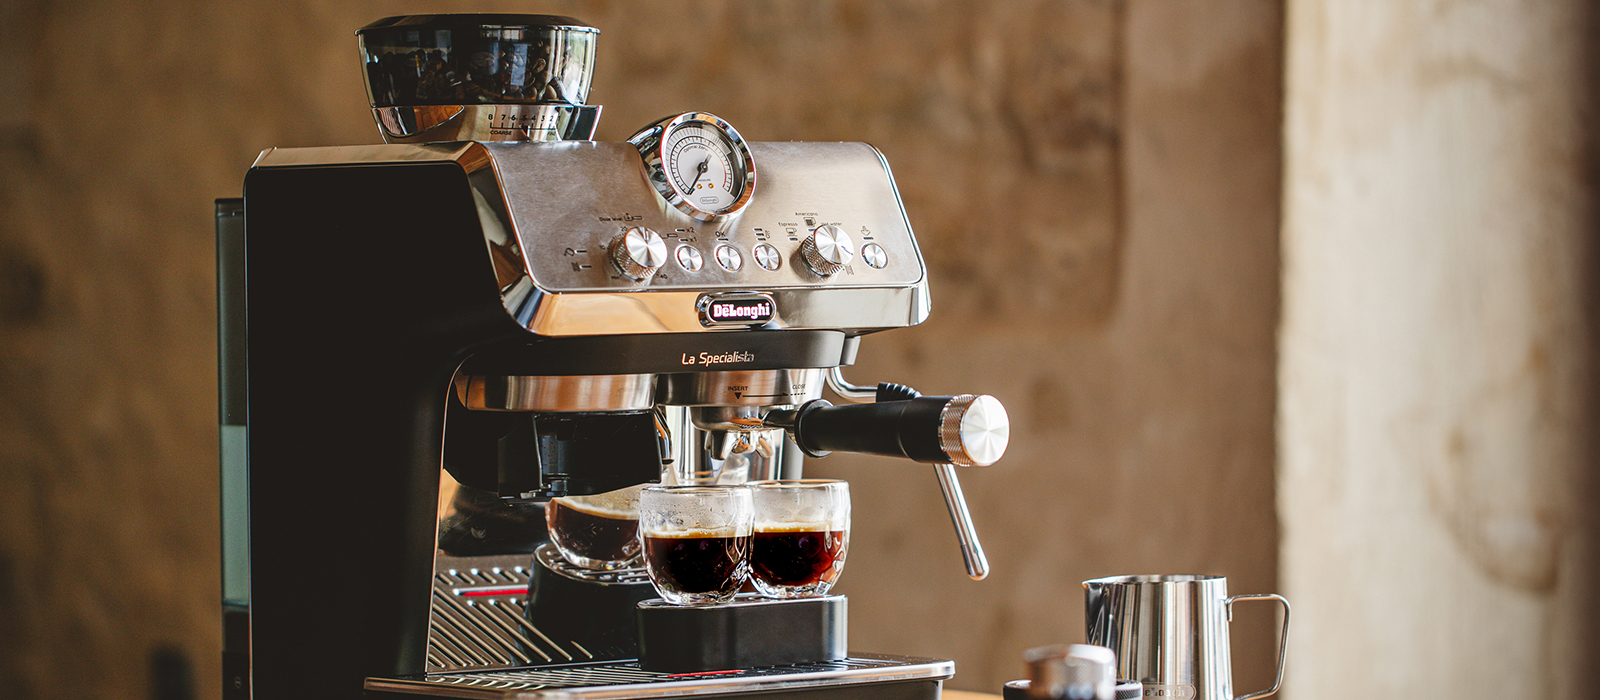 Is Manual Espresso Right for You?